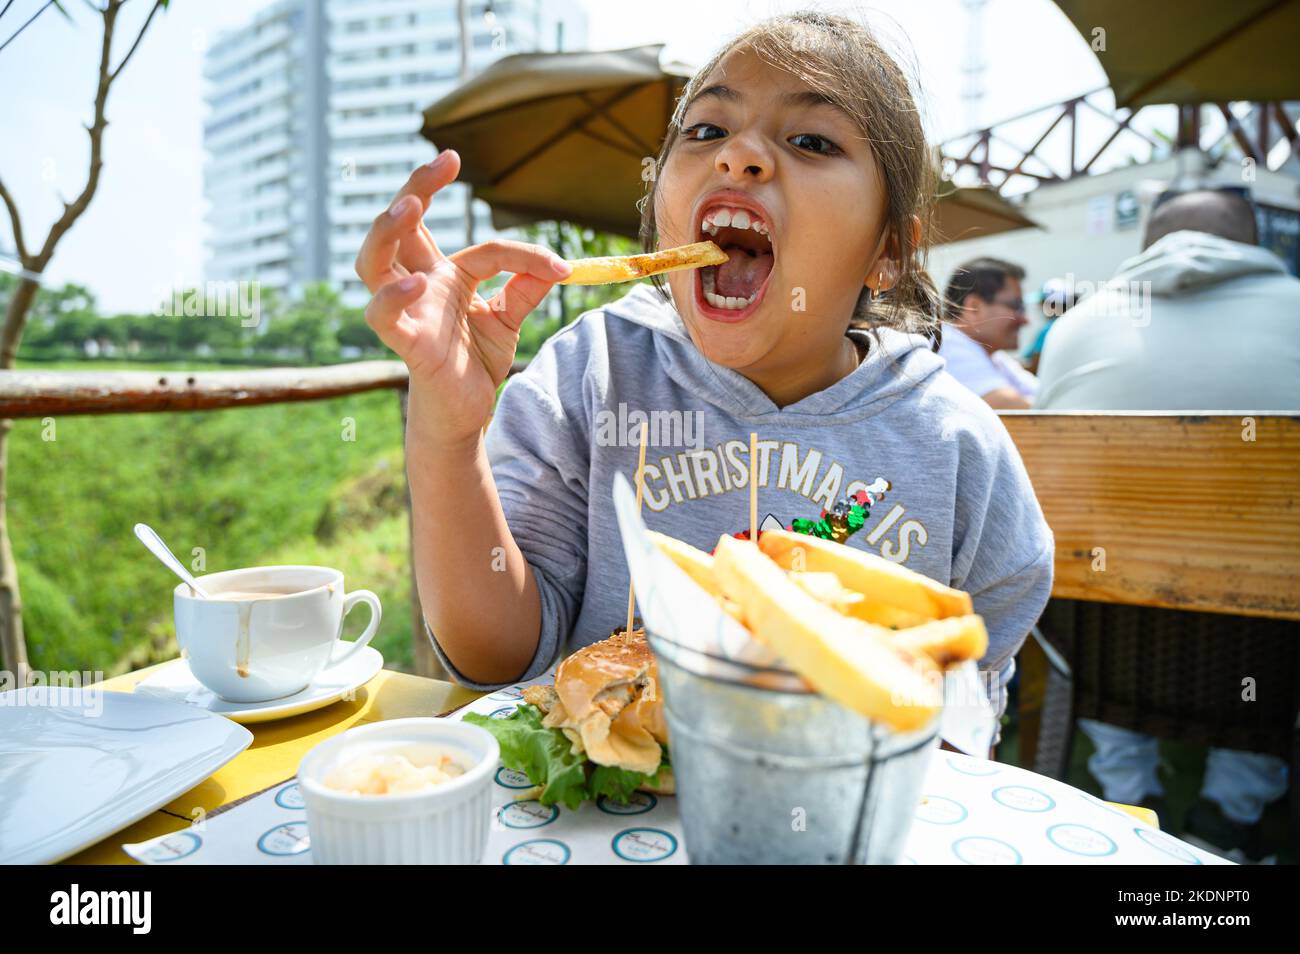 little girl has breakfast in a cafe, eats hamburger and french fries, drinks chocolate Stock Photo